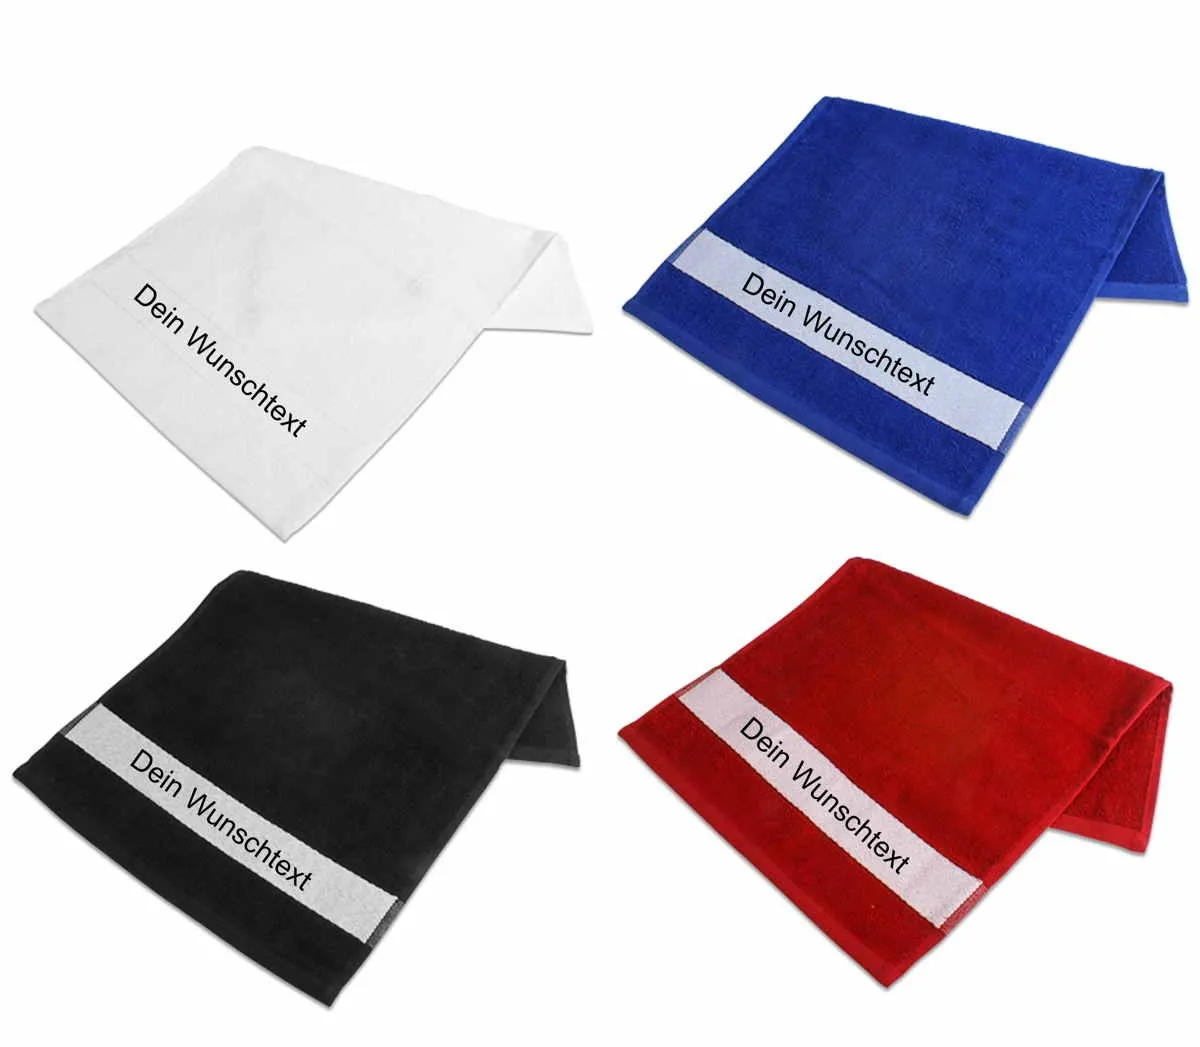 Guest towel printed with name or text of your choice